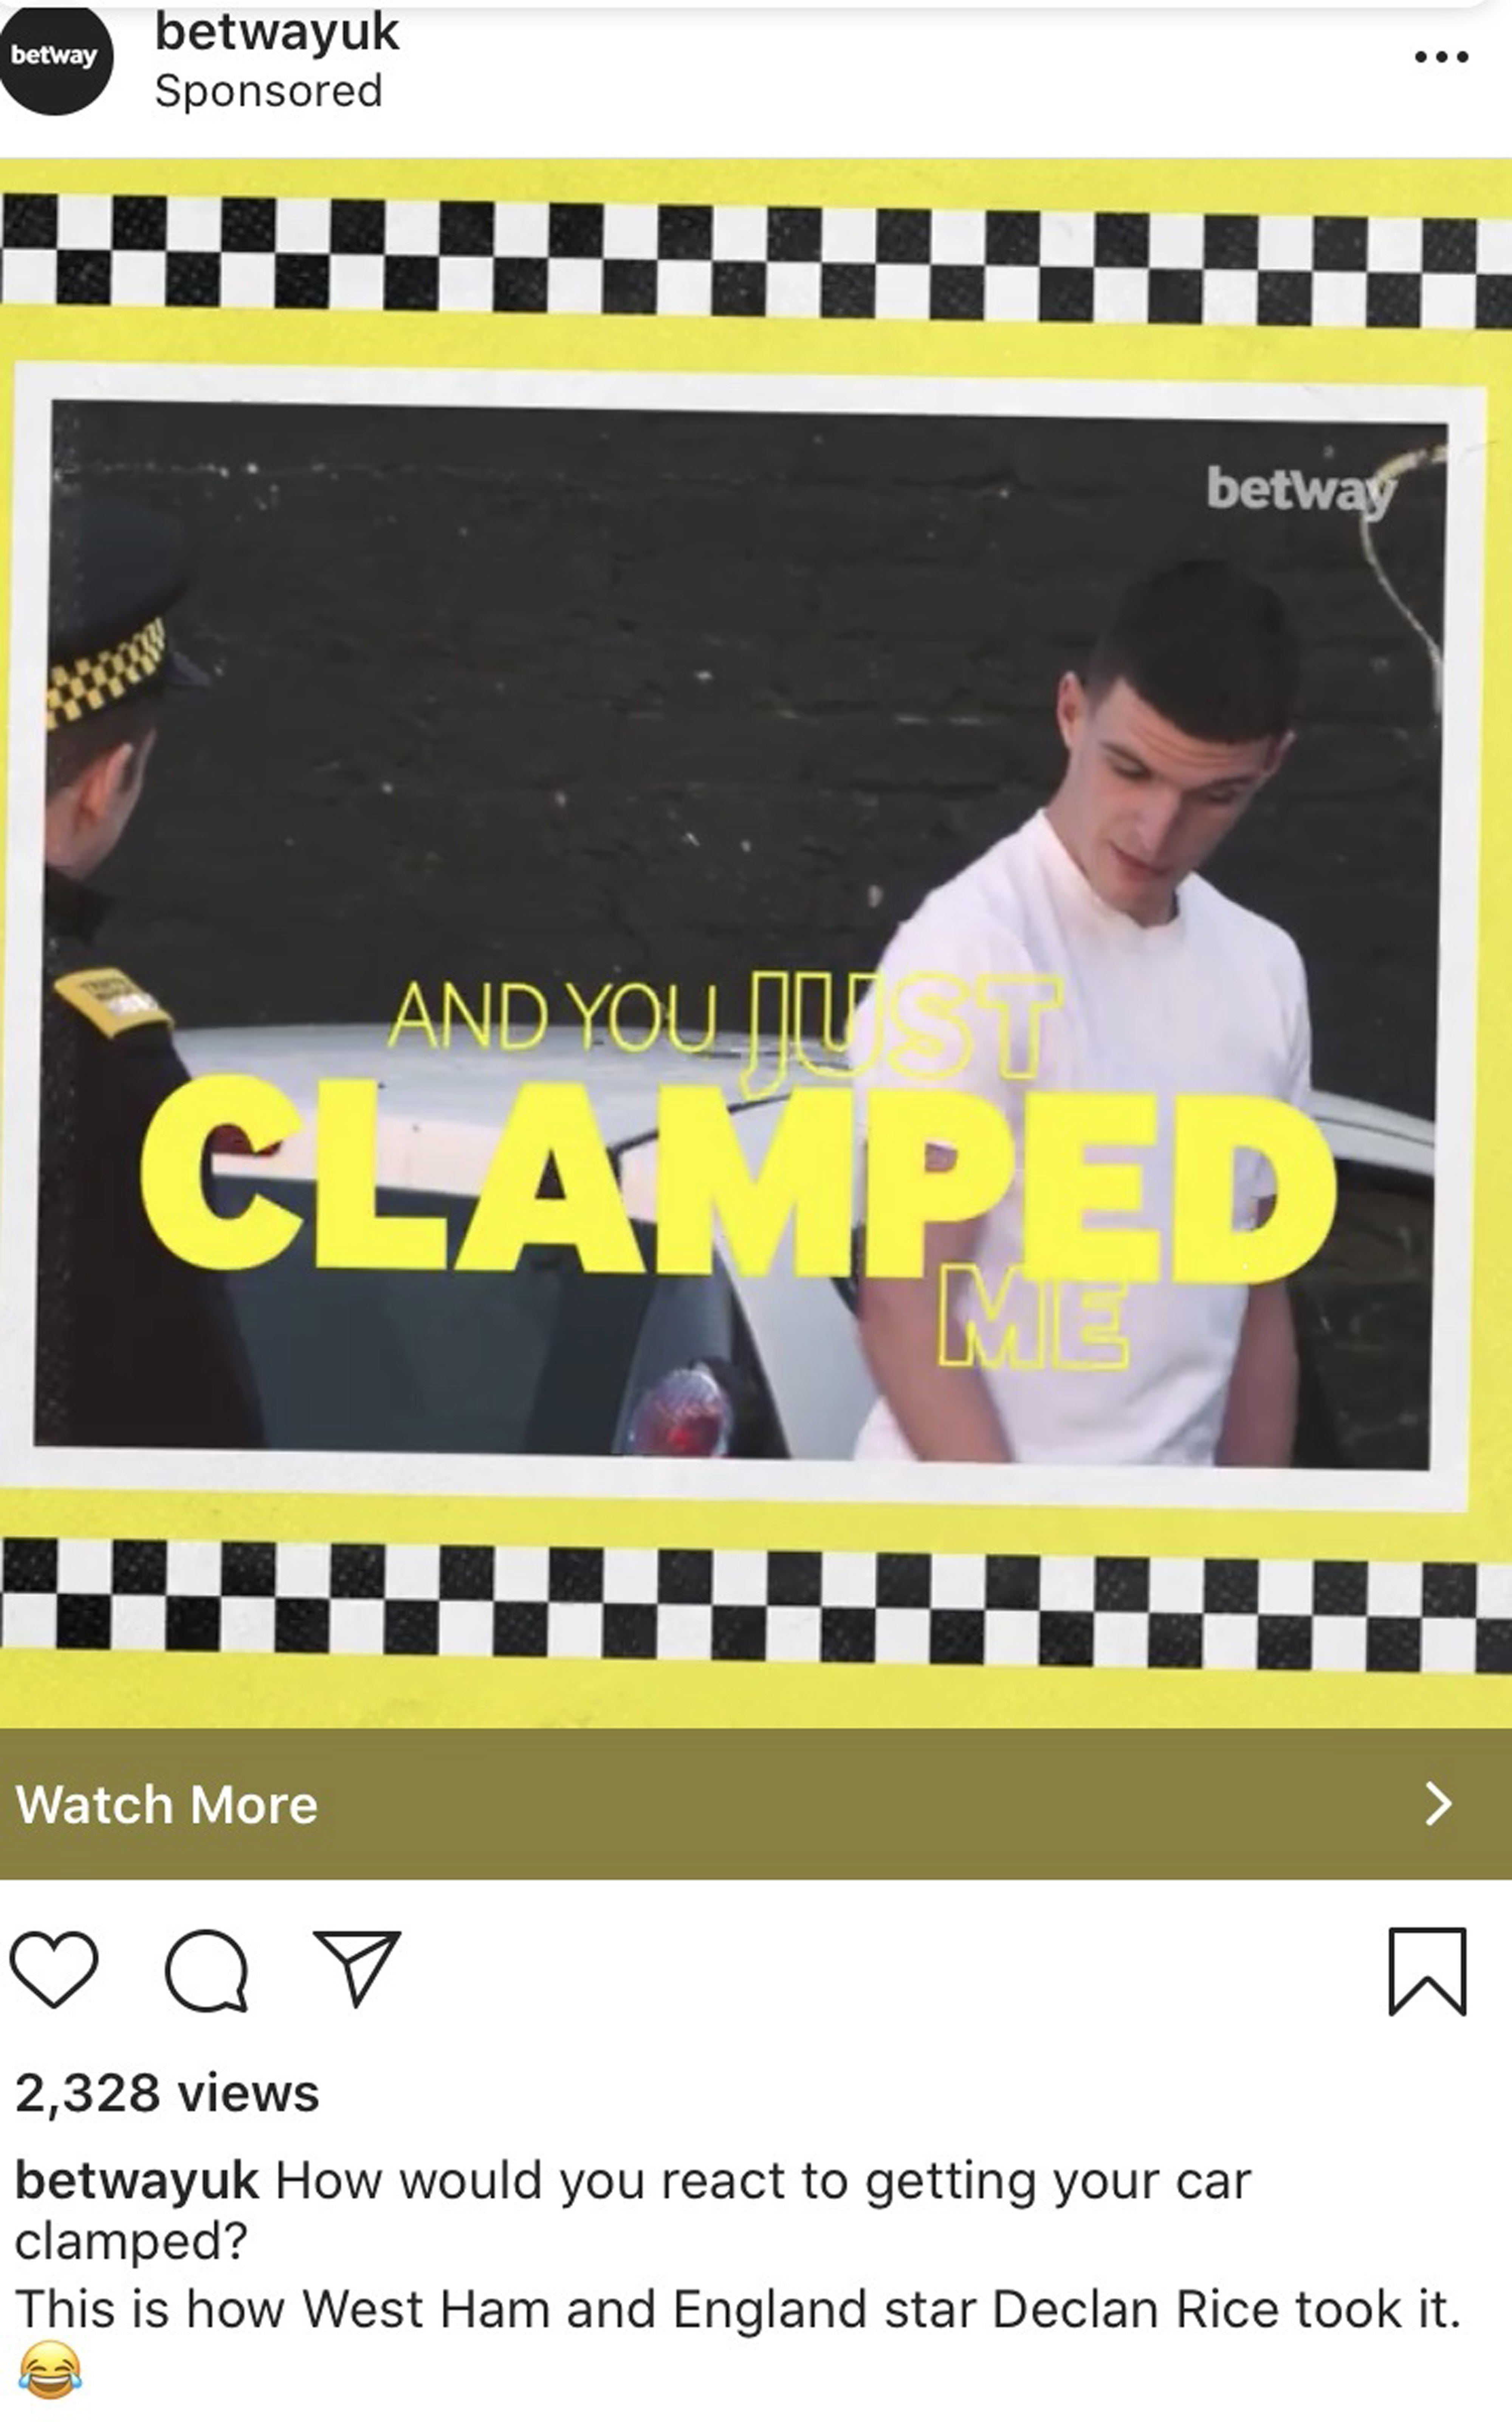 The Betway ad featuring Declan Rice. (ASA/PA)